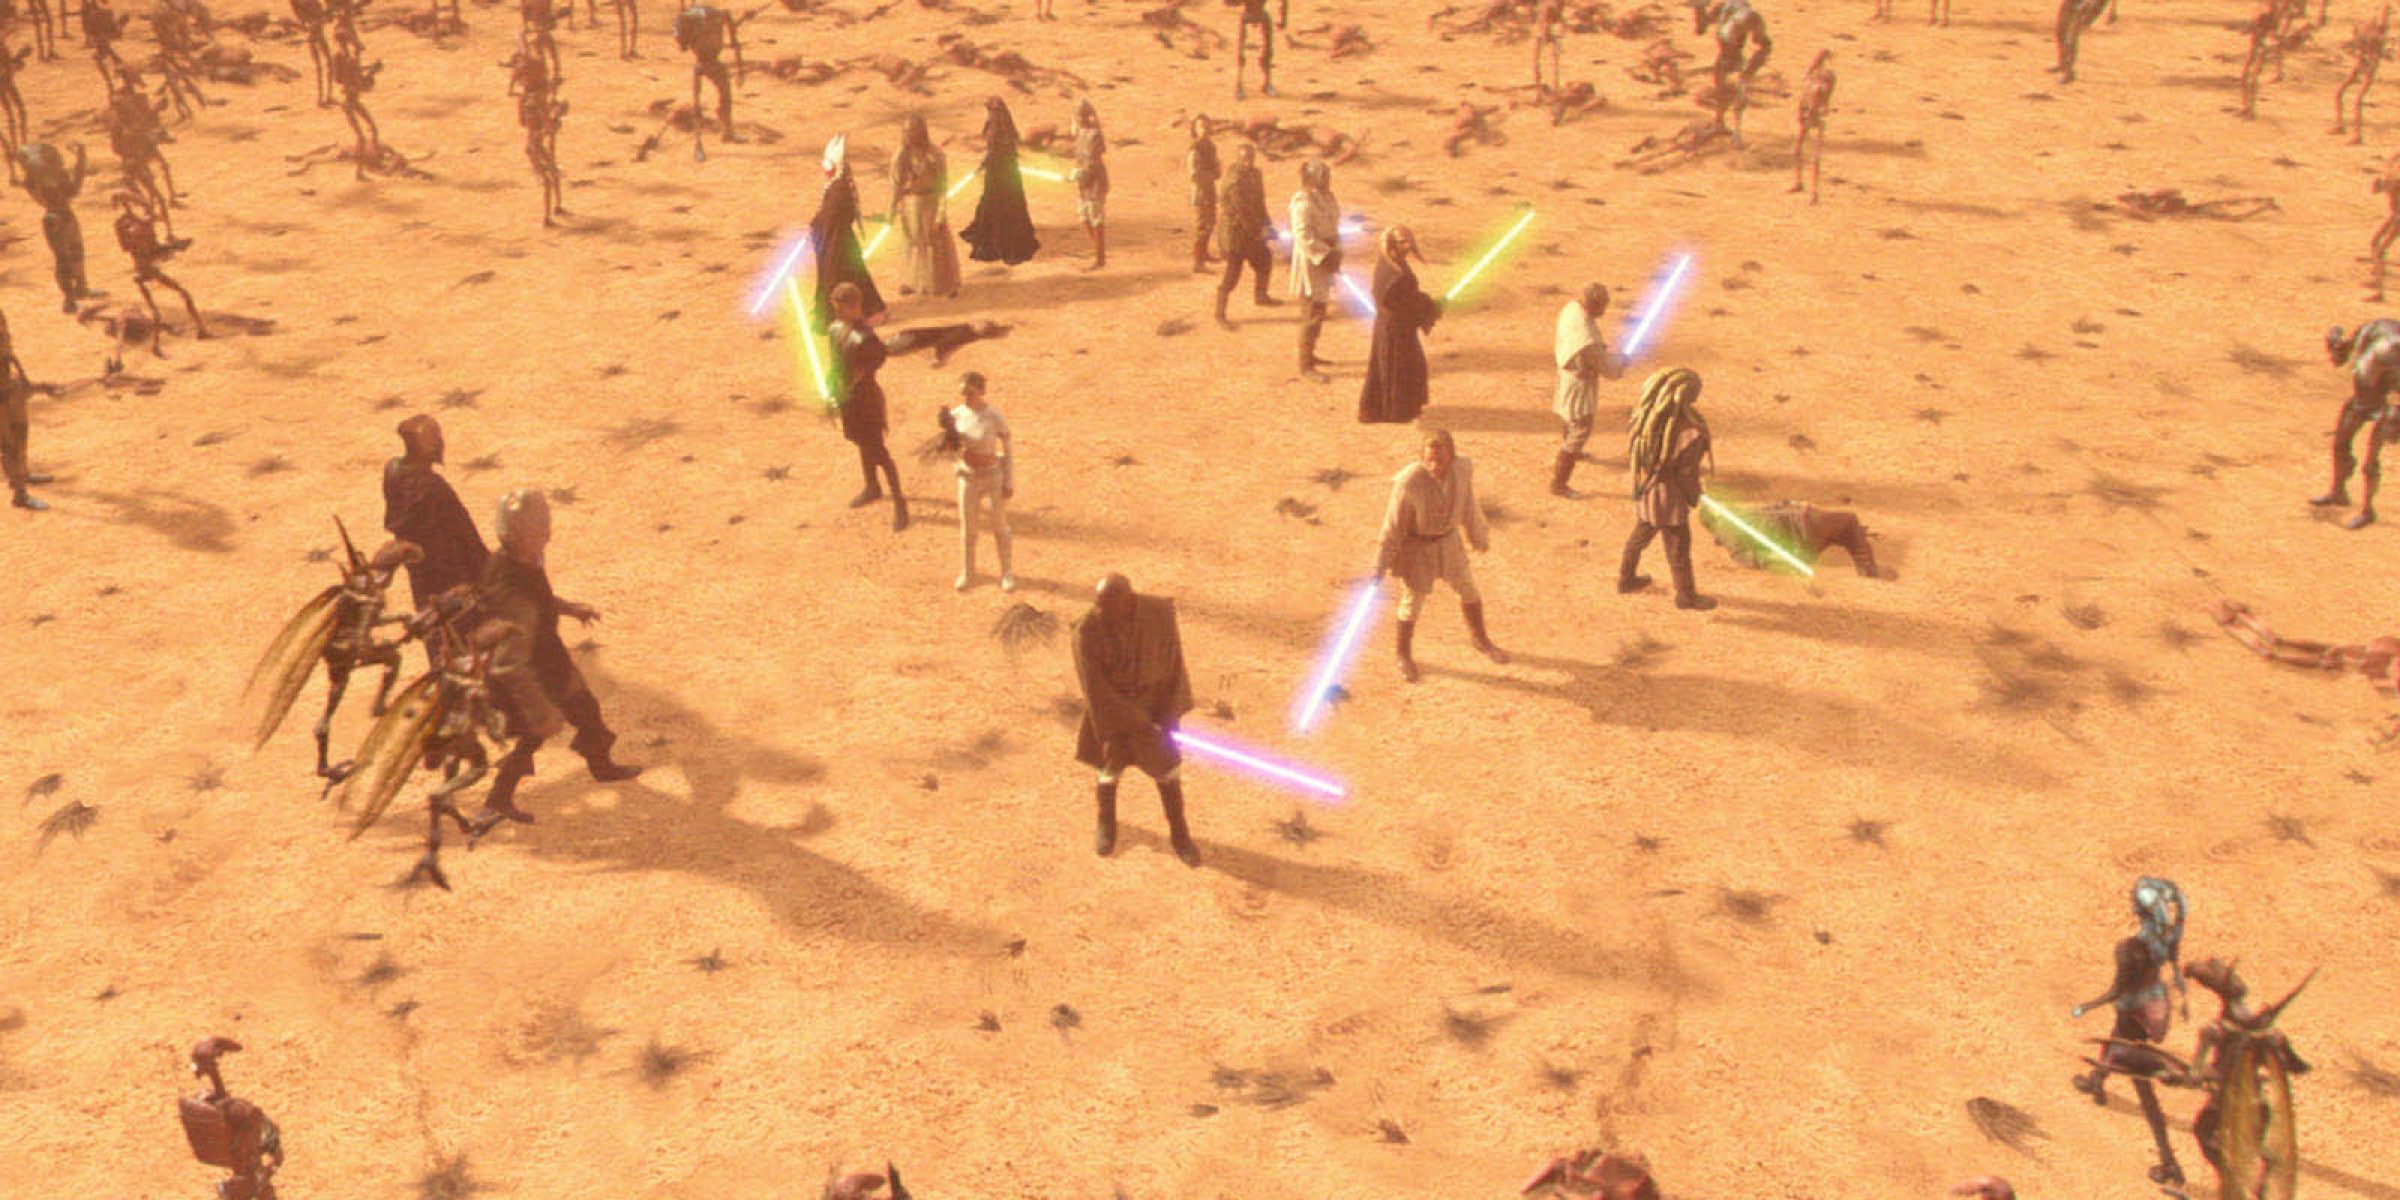 In Attack of the Clones, the Jedi on Geonosis form a protective ring to defend against the droids.